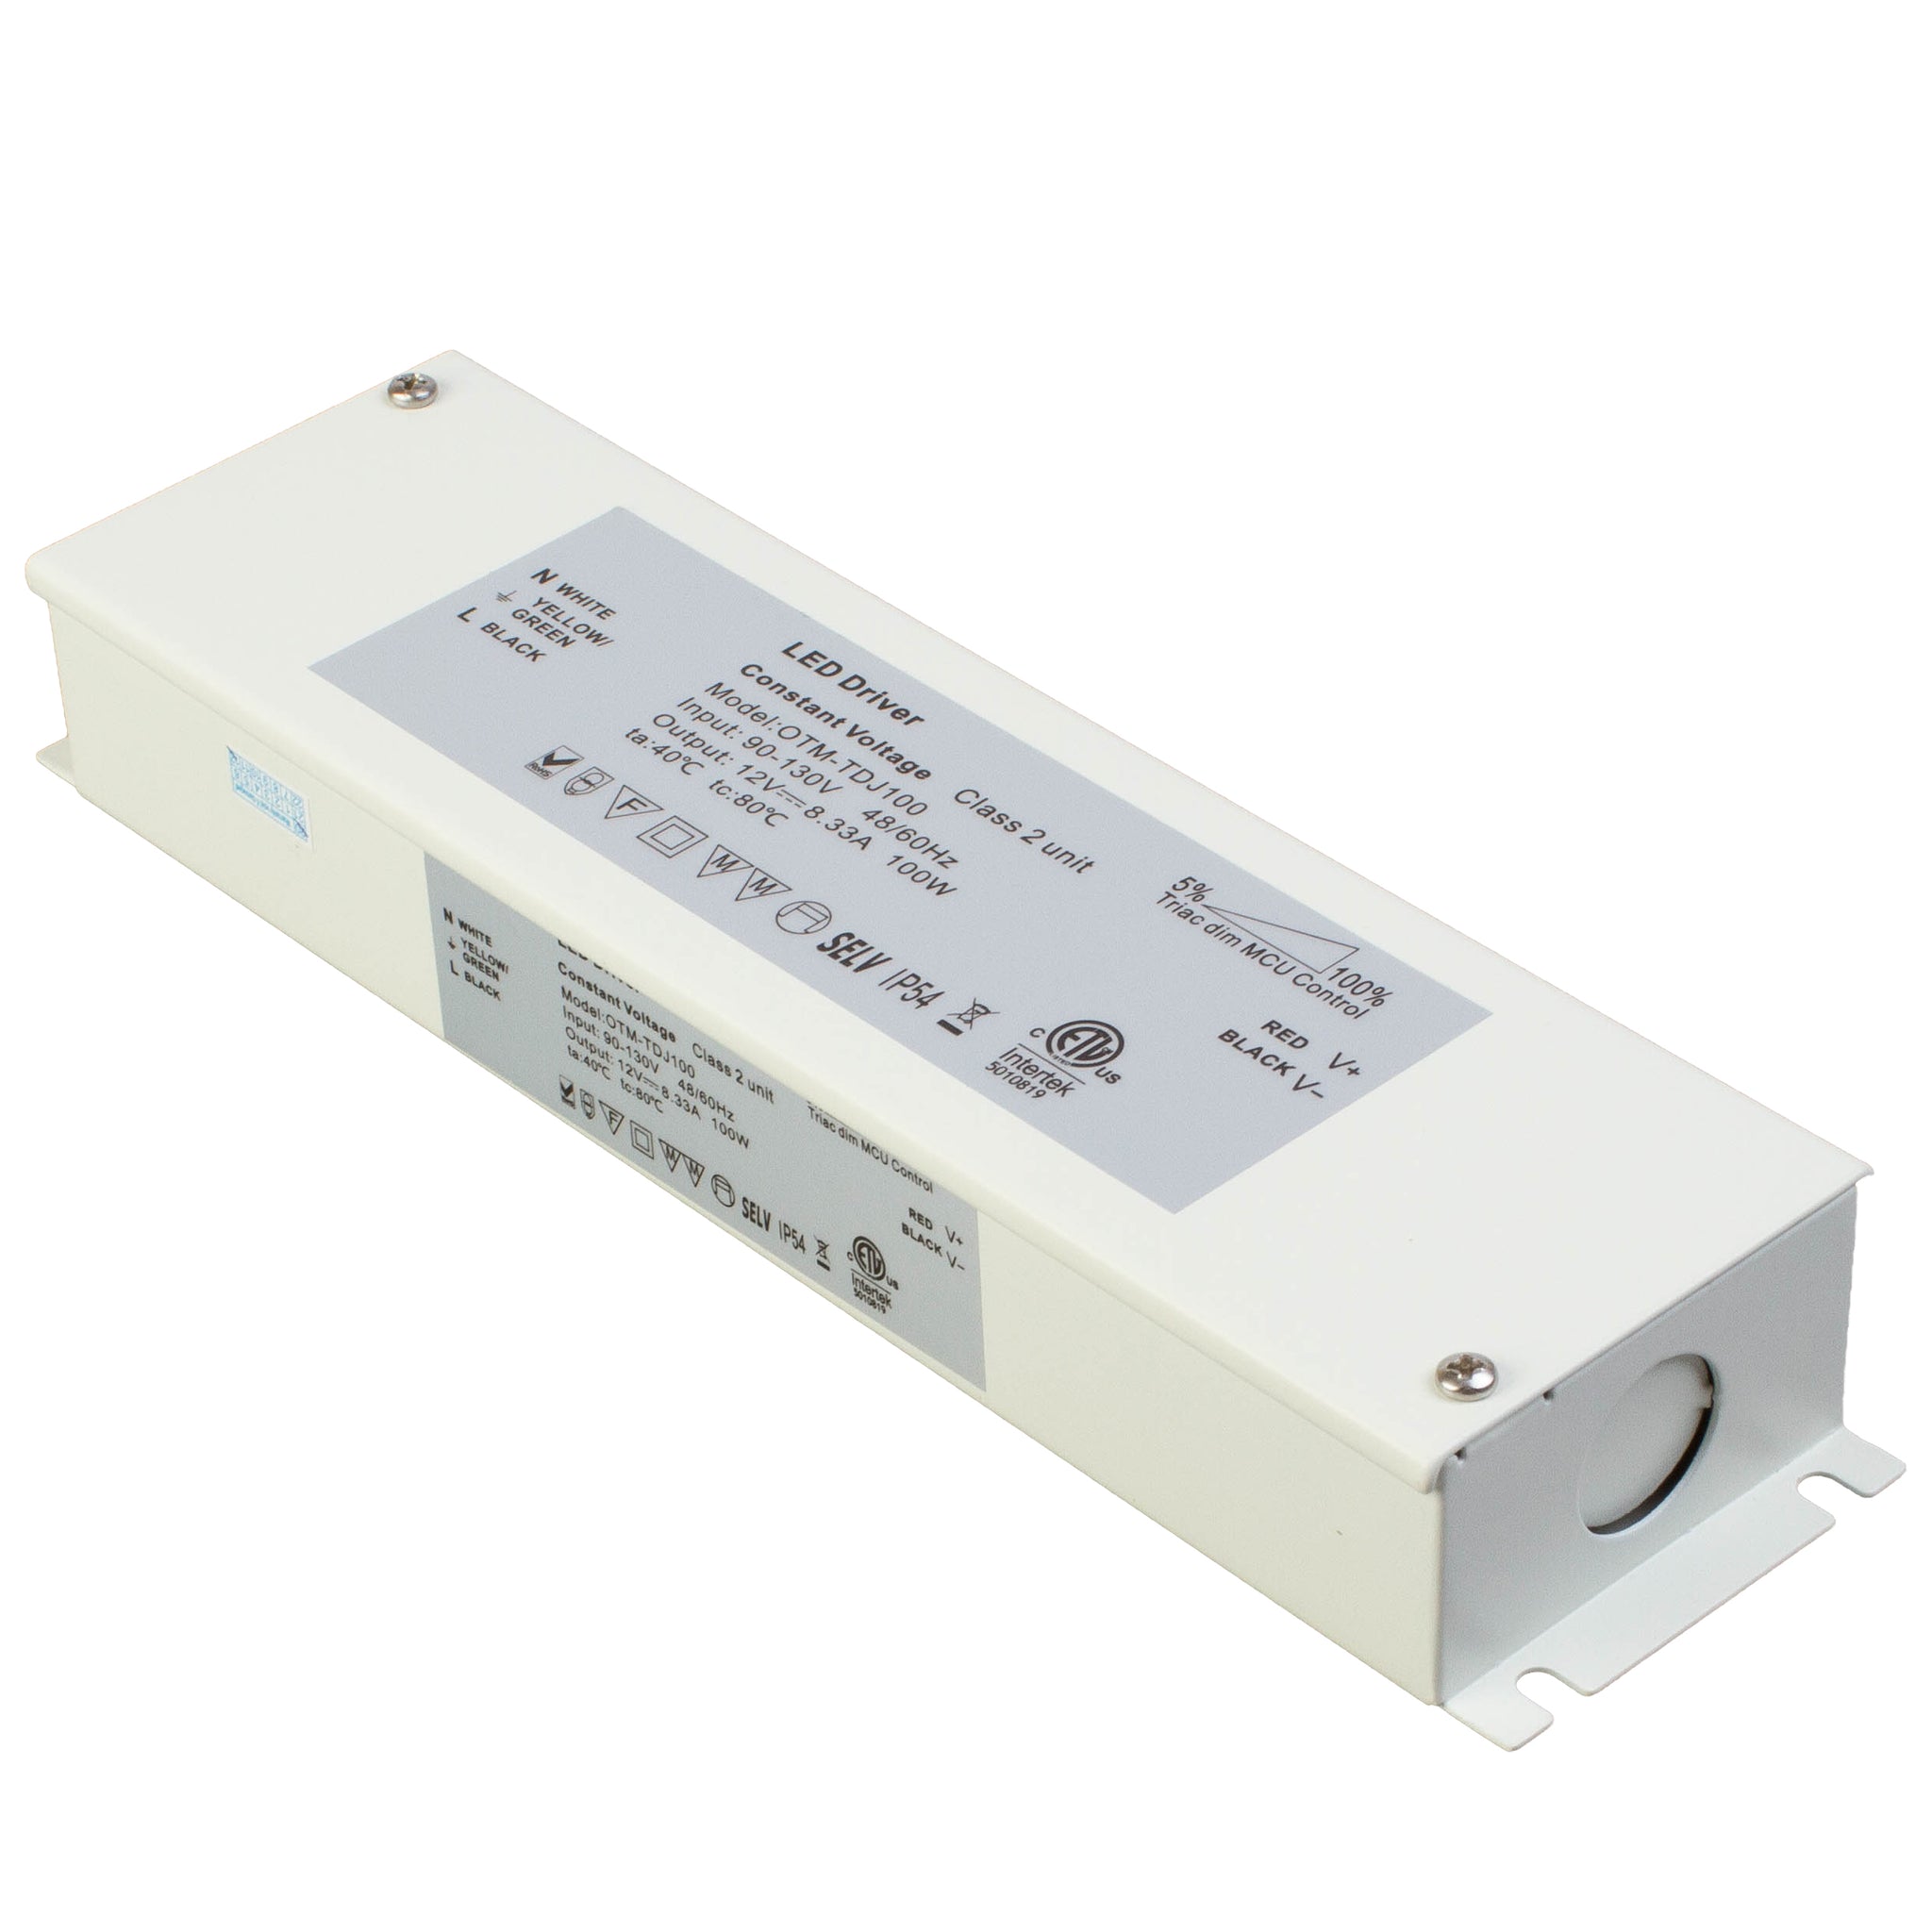 Etl Listed 12v 83 Amps 100w Constant Voltage Power Supply Driver With